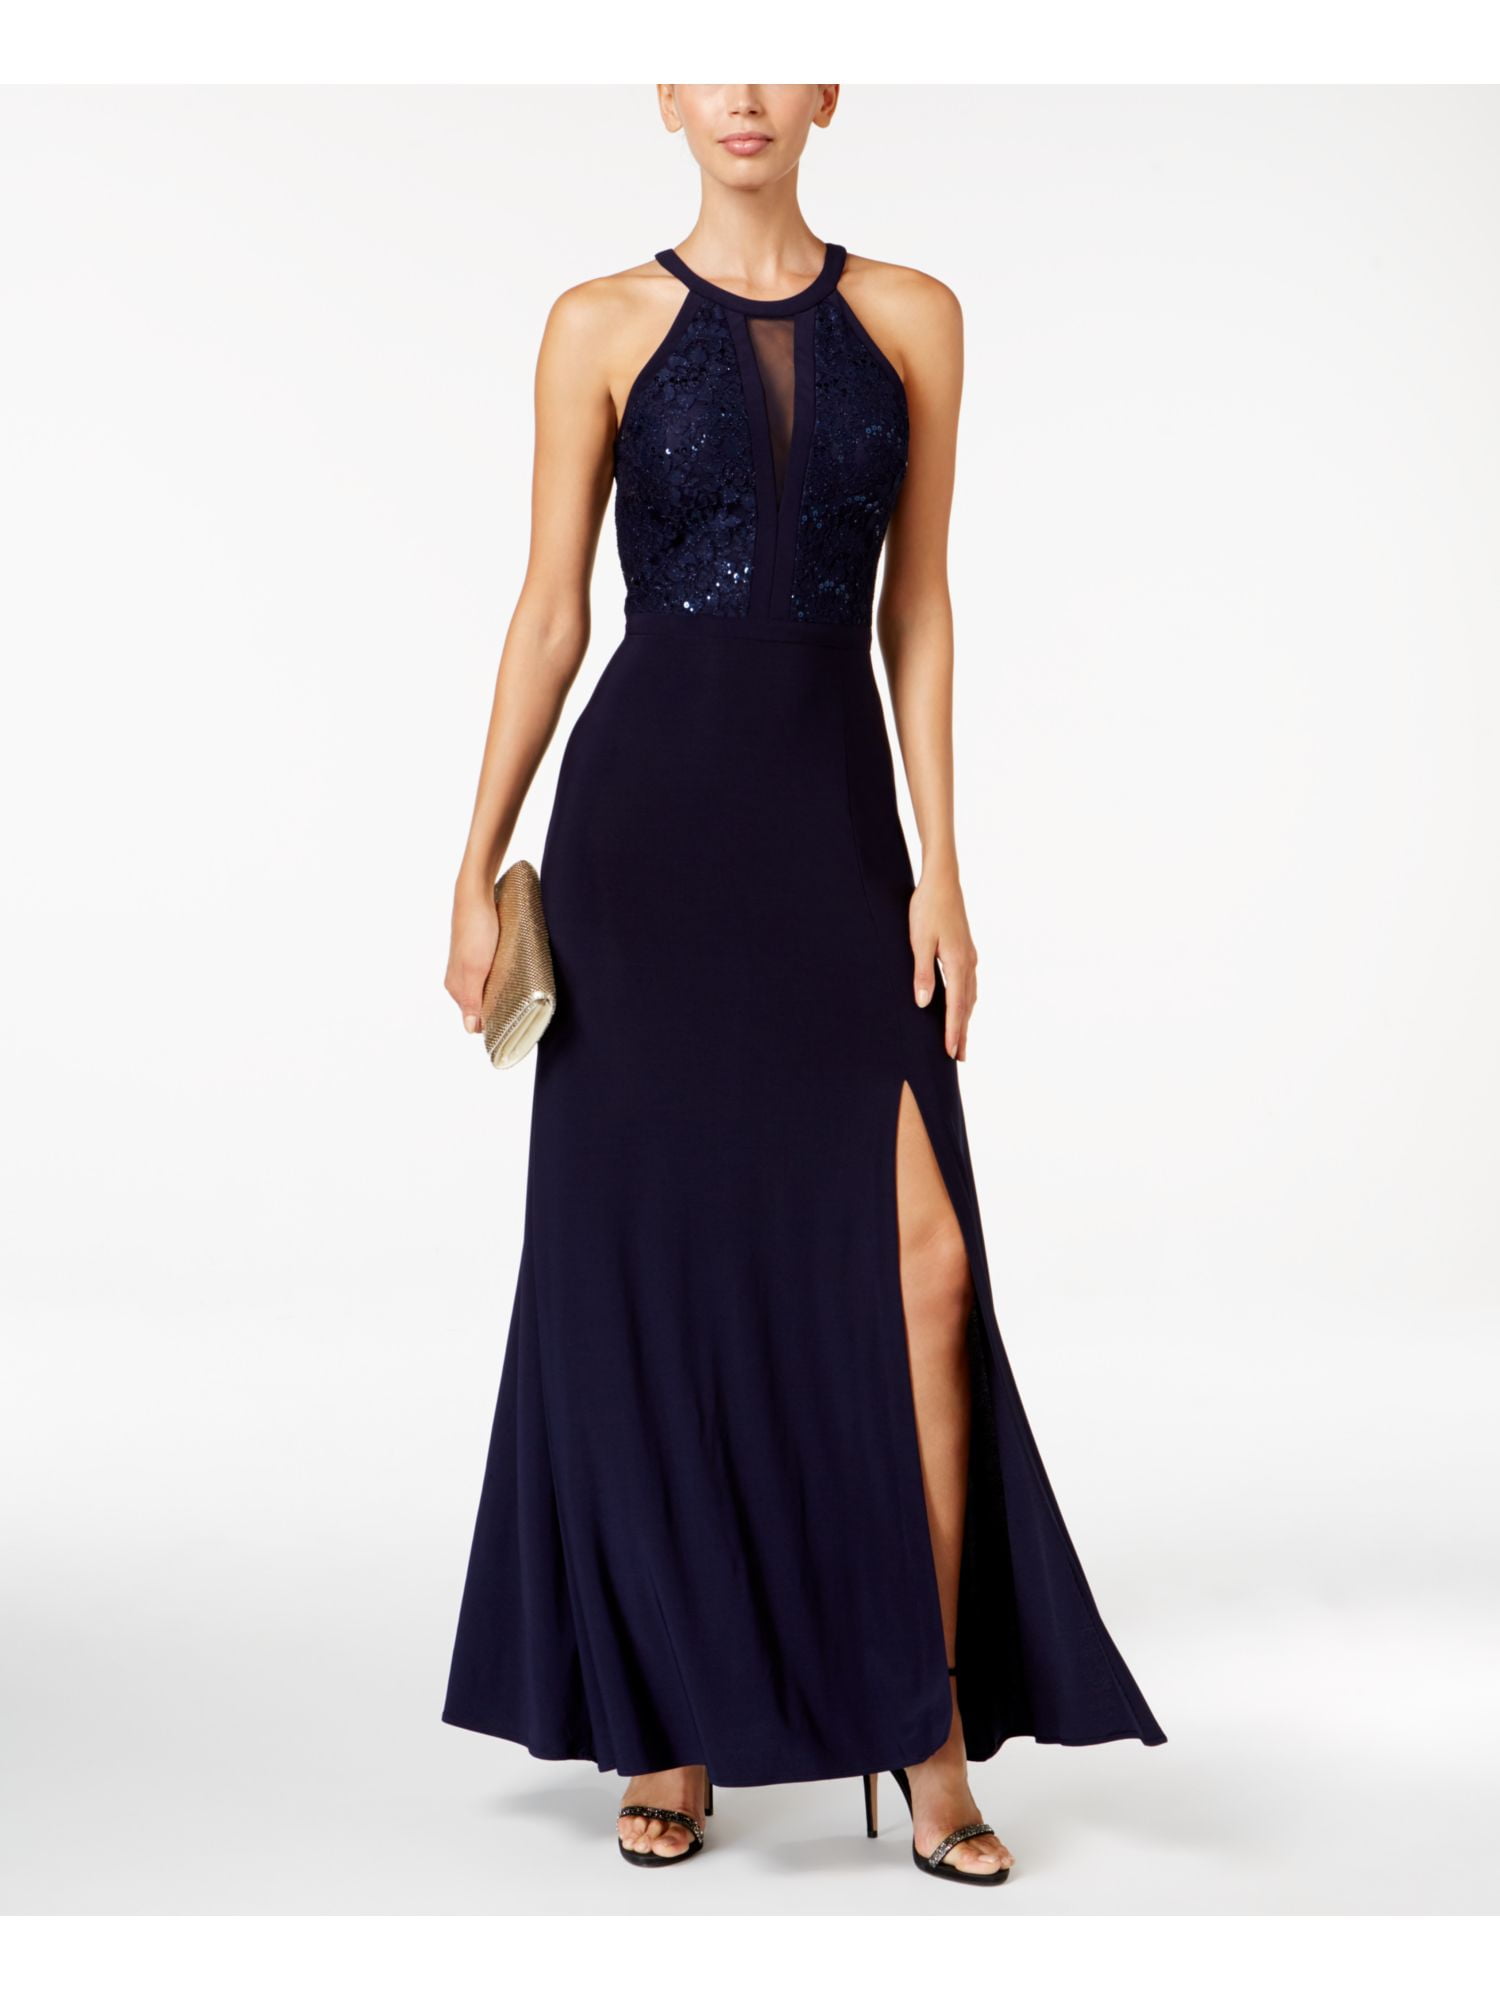 NIGHTWAY Womens Navy Gown Lace Trim ...